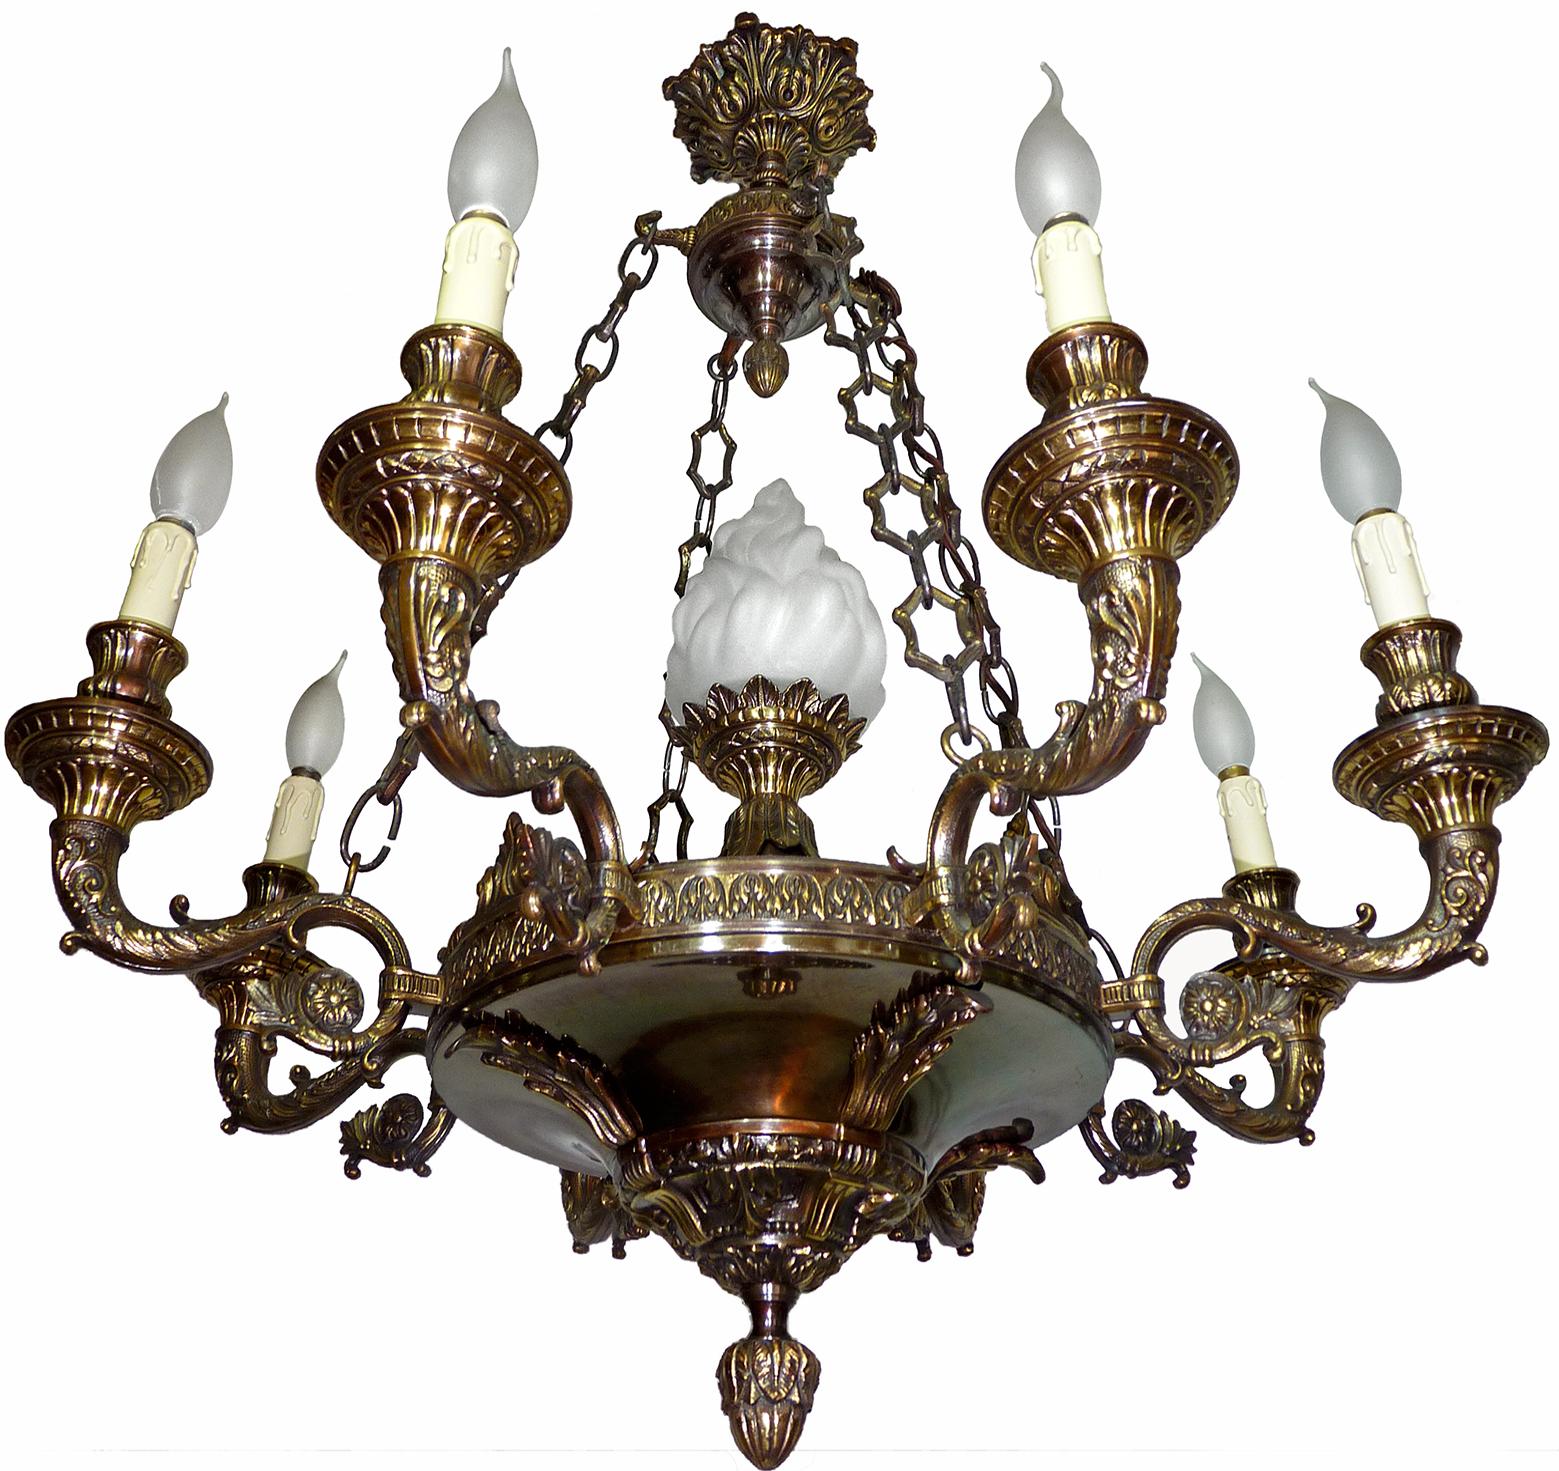 Spectacular large neoclassical French Empire chococate brown patinated and gilt bronze 9-light chandelier with faux candle sockets

Measures:
Diameter 27.6 in/ 70 cm
Height 35.5 in/ 90 cm
Weight 36 lb. (16 kg).
Glass shades, 11, 8 in (20 cm)/ 4.7 in